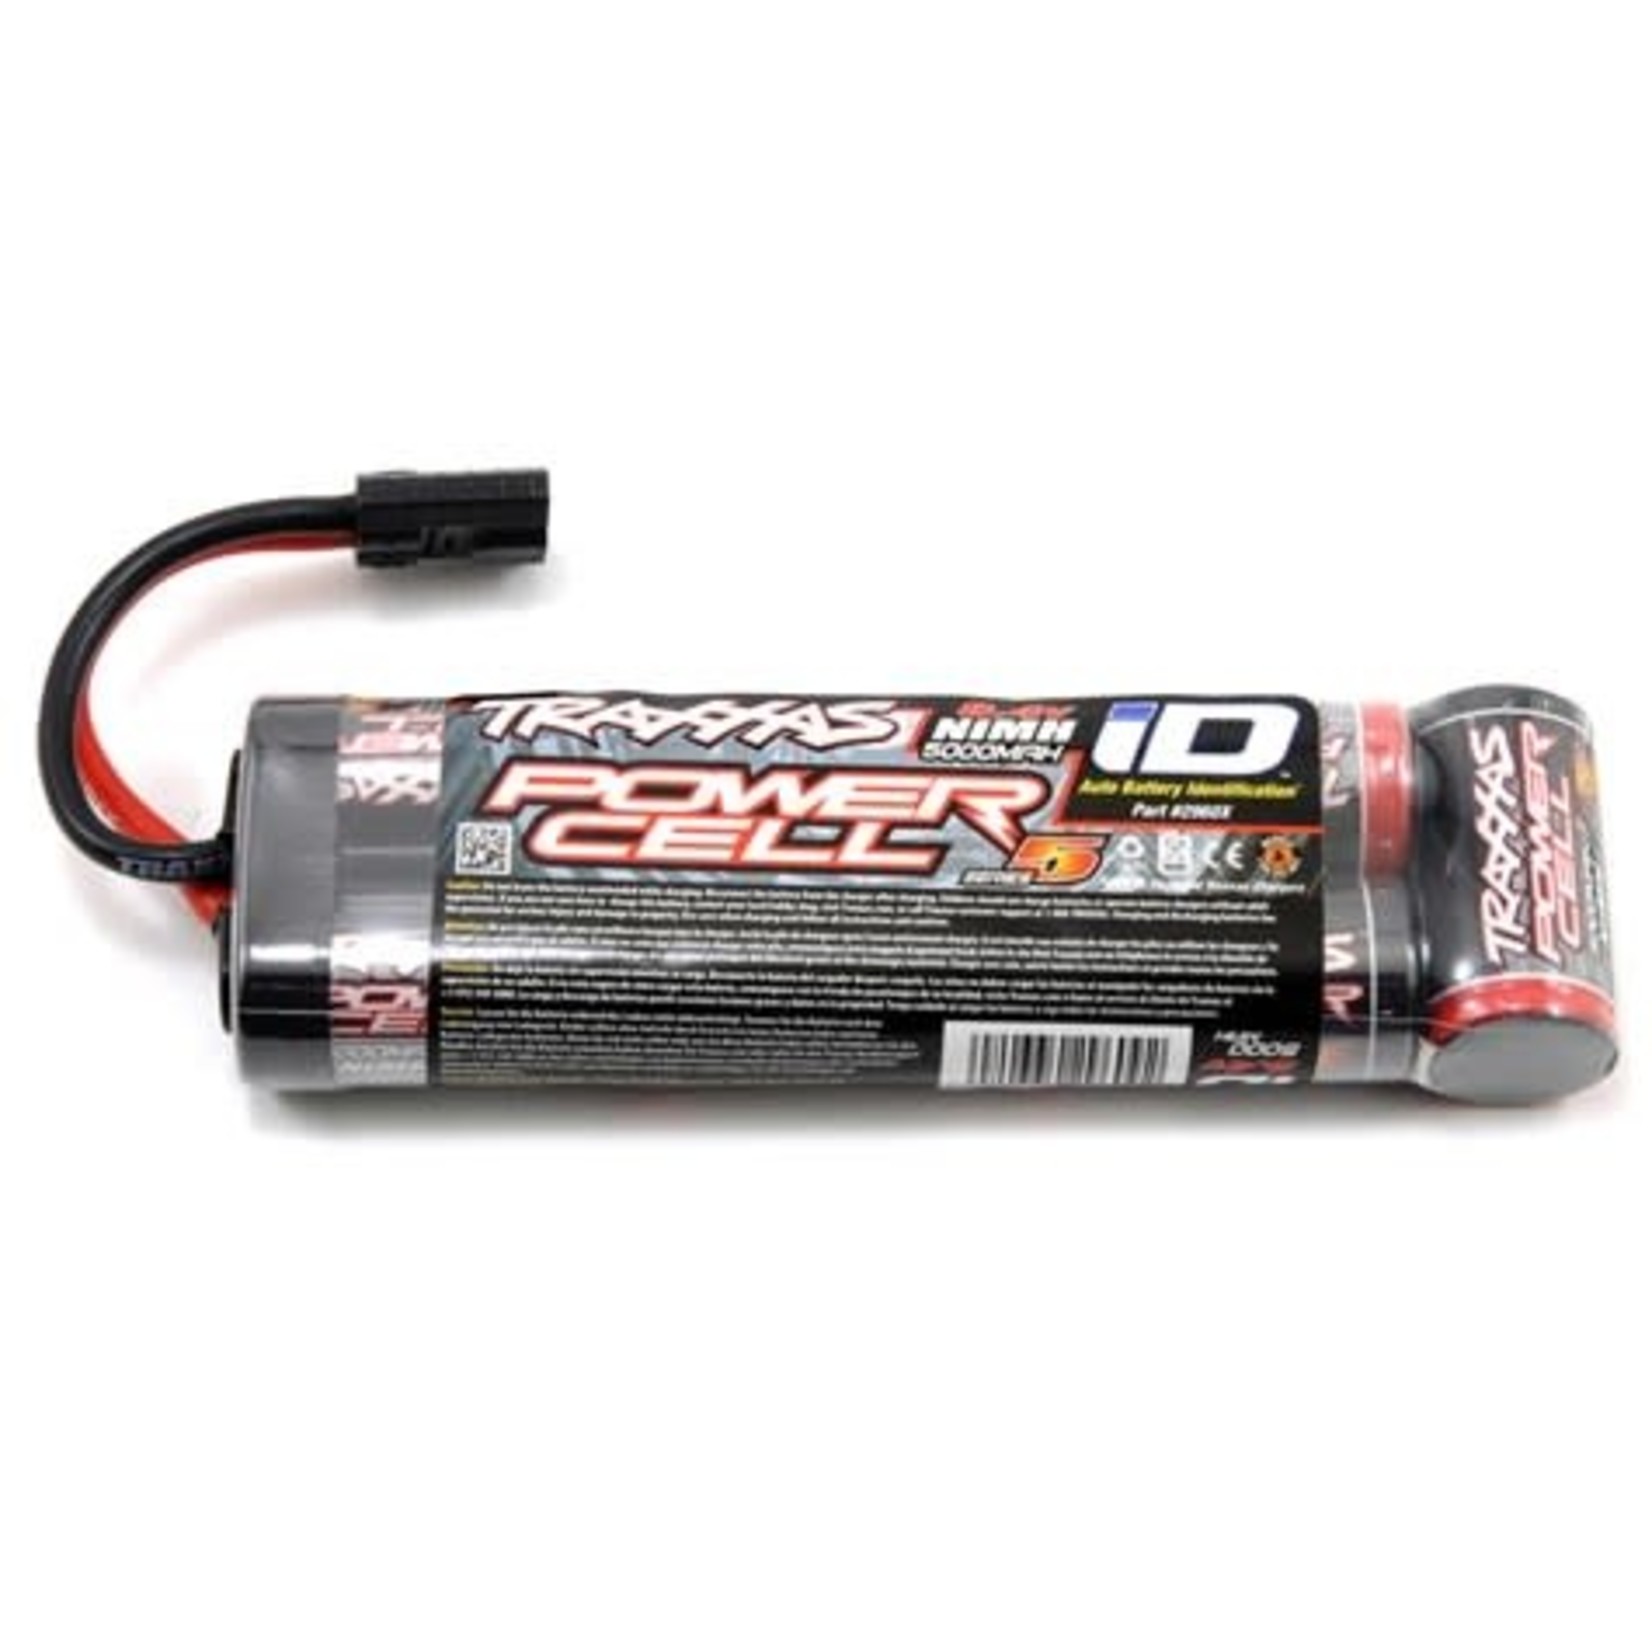 Traxxas Traxxas Series 5 7-Cell Stick NiMH Battery Pack w/iD Connector (8.4V/5000mAh) #2960X